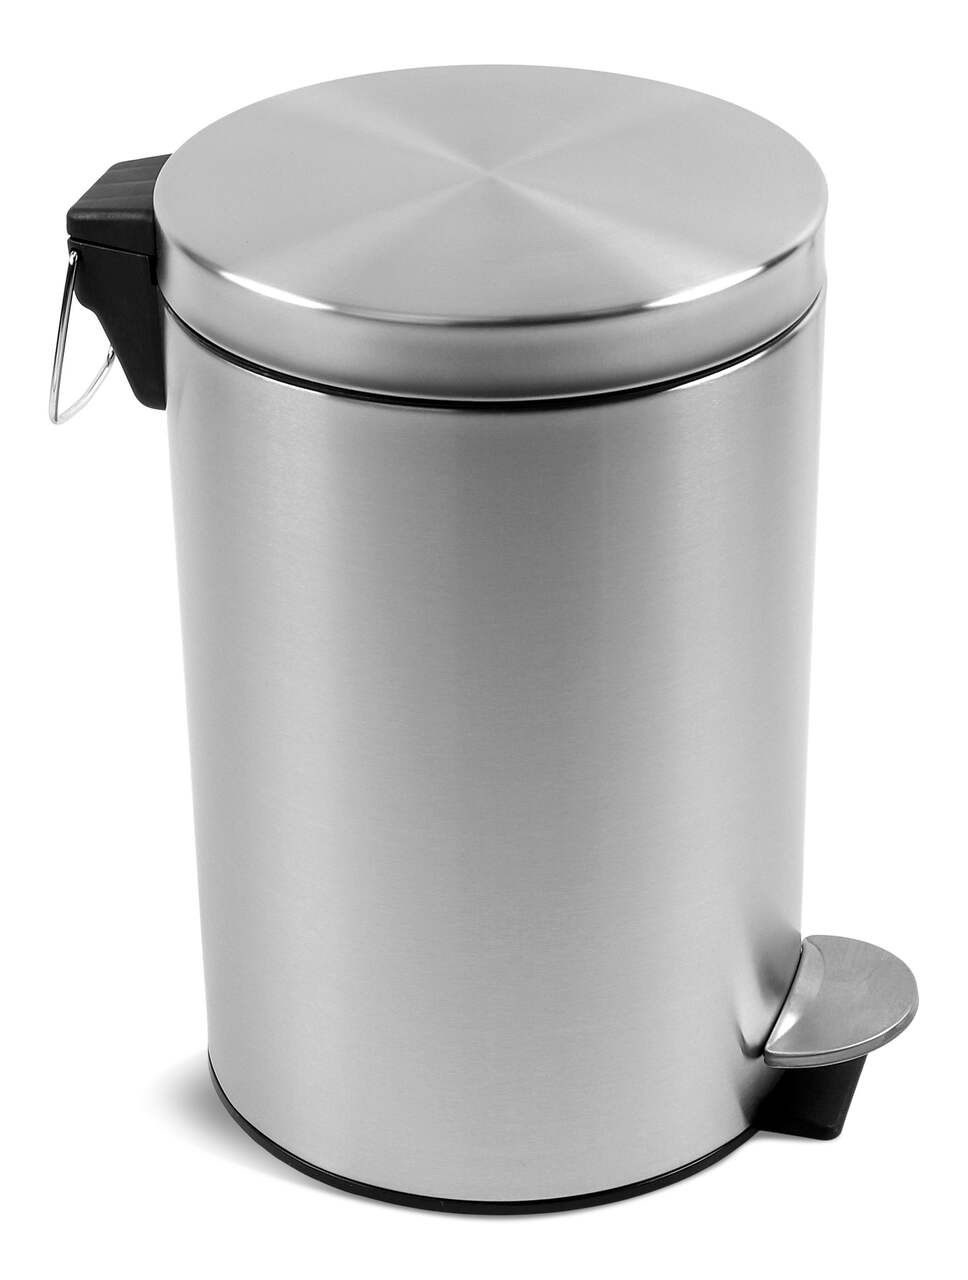 type A Stainless Steel Circular Step Garbage Can, 12-L